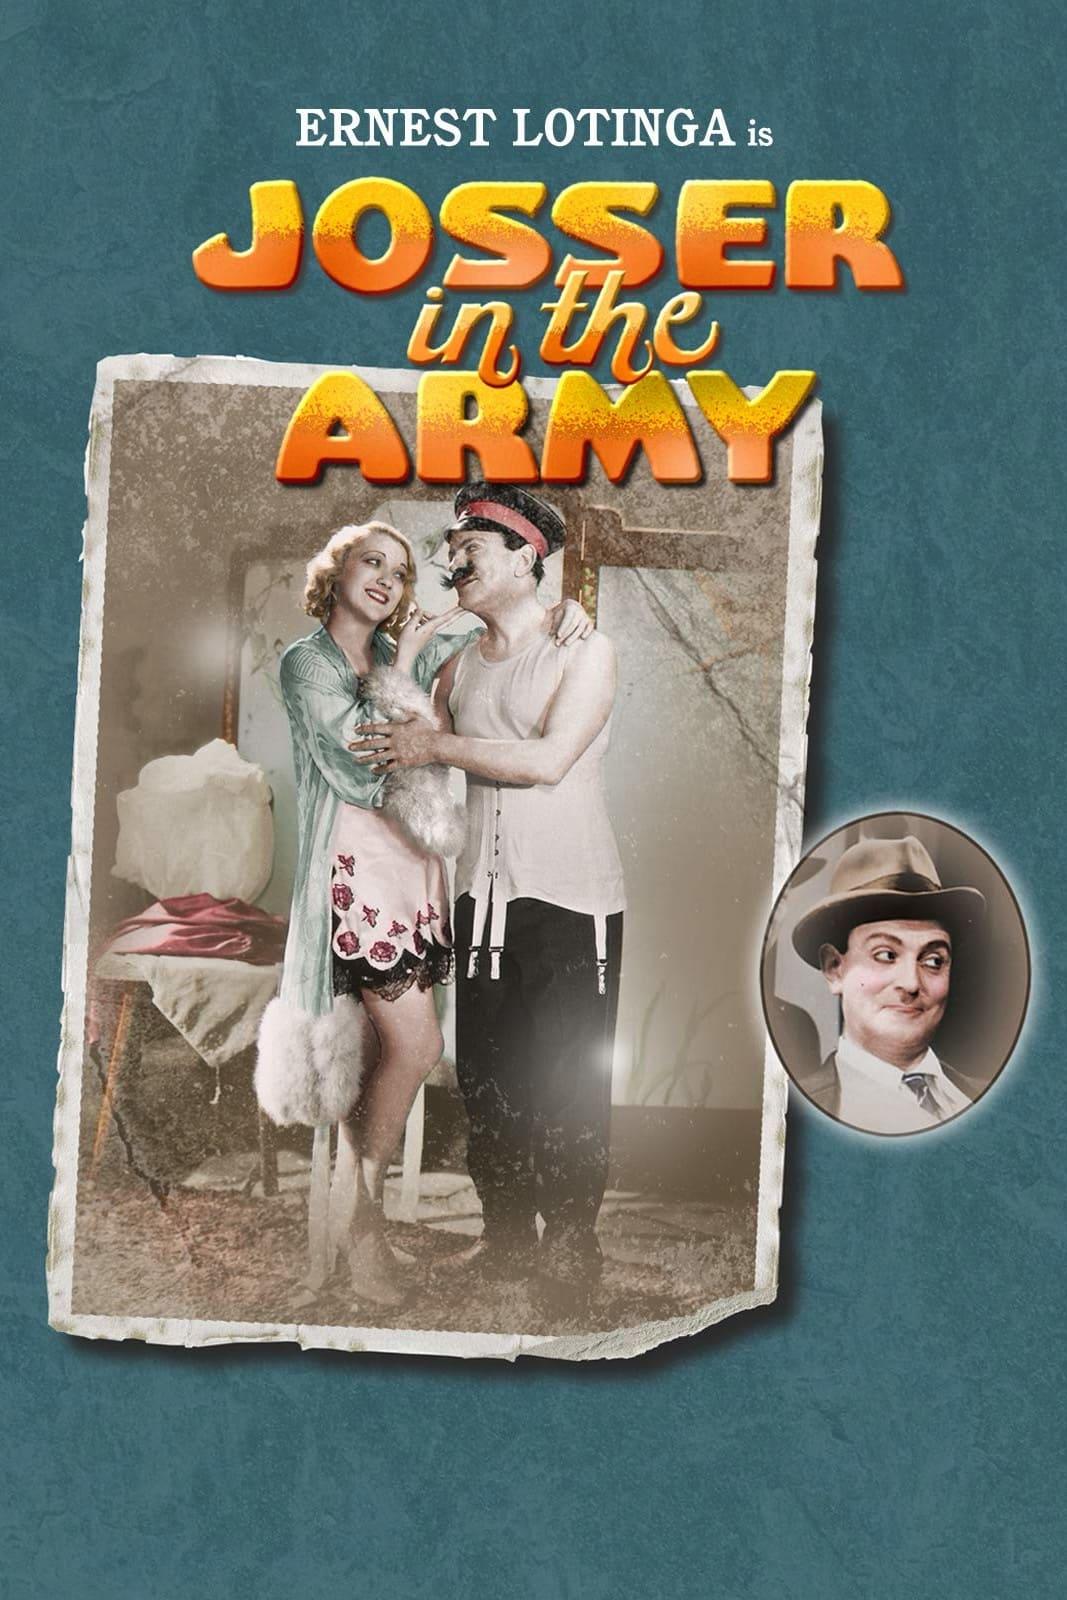 Josser in the Army poster